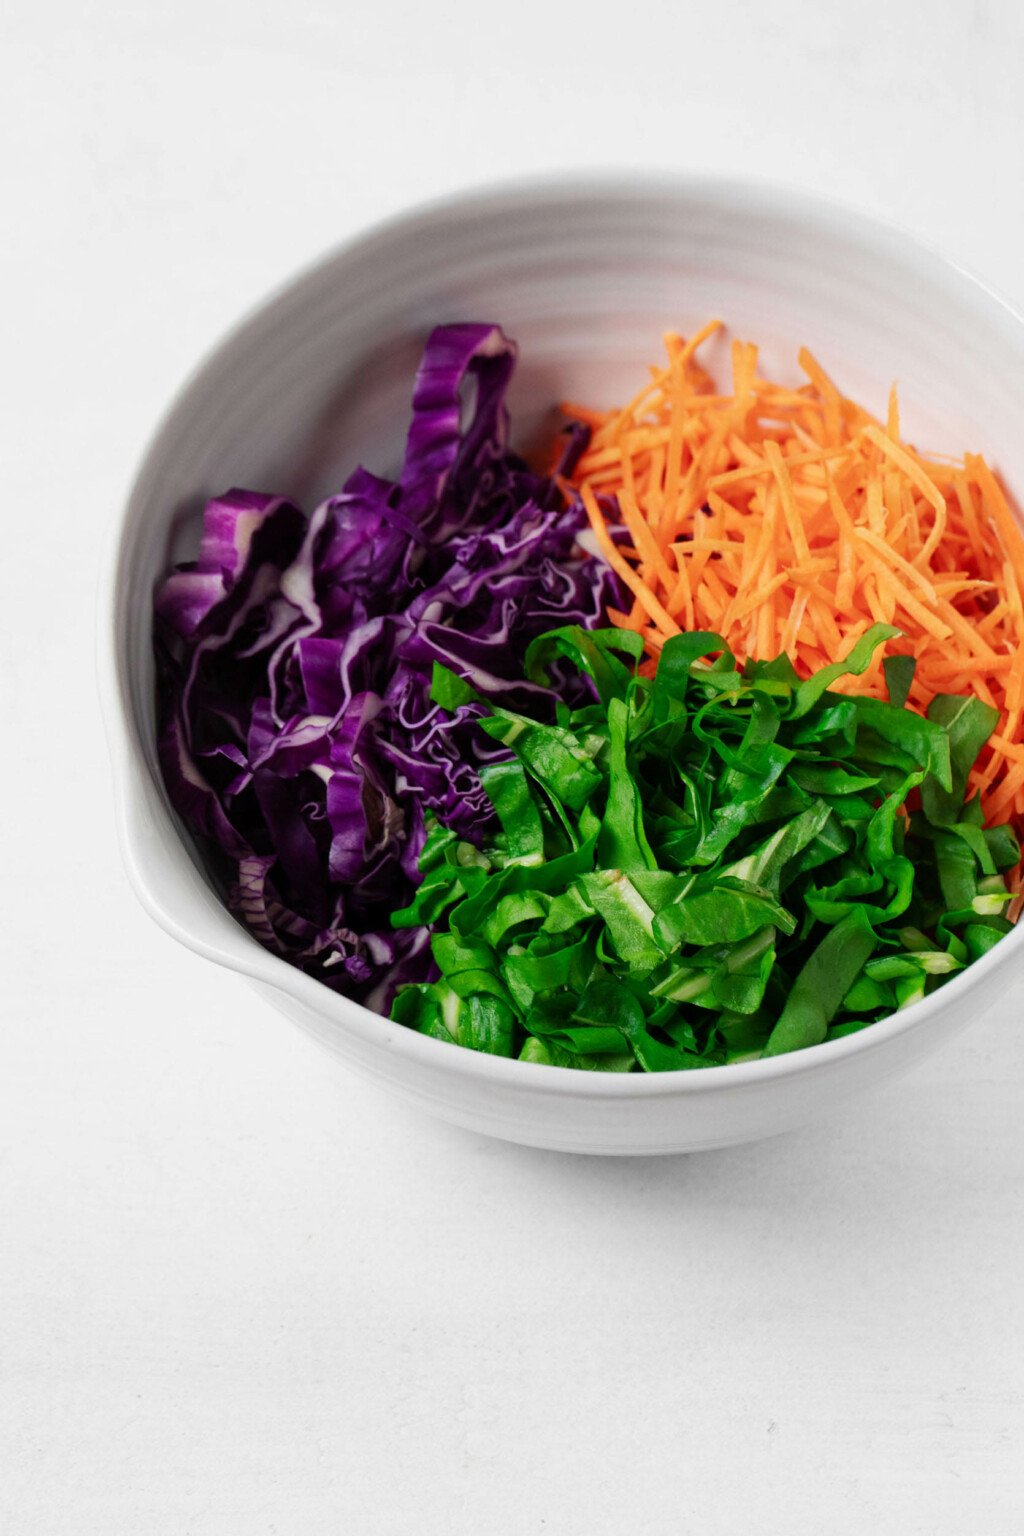 A large mixing bowl is filled with cabbage, carrots, and sliced collard greens.